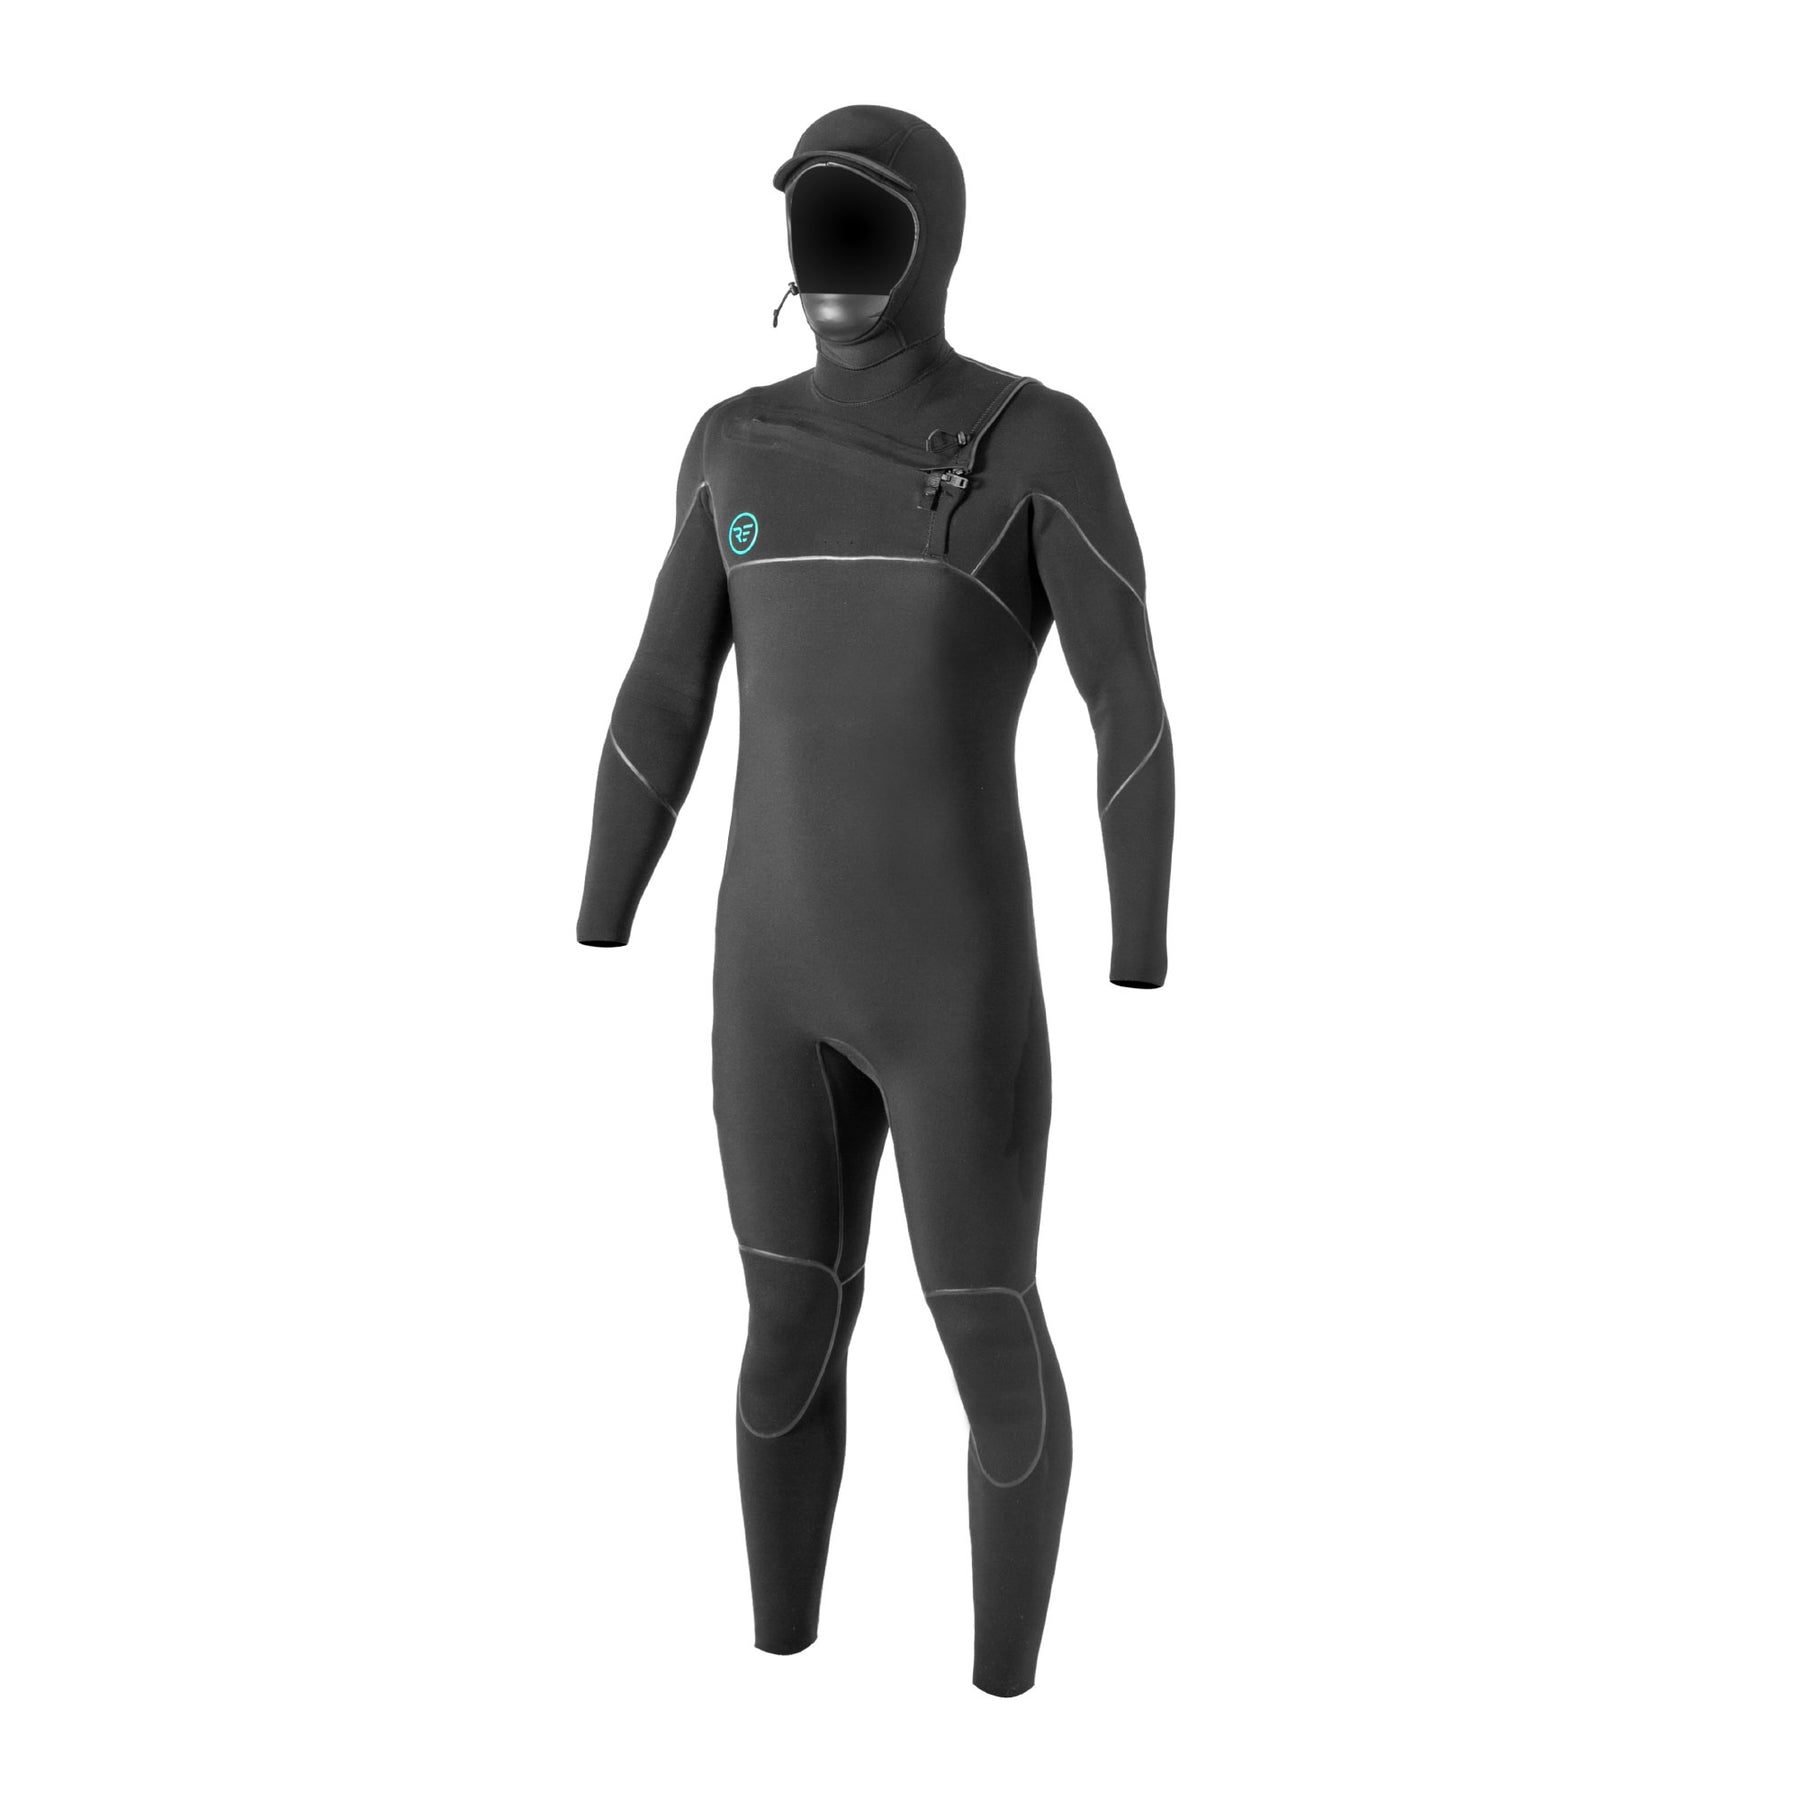 Ride Engine Apoc 5/4/3 FZ Hooded Wetsuit – The Foiling Collective